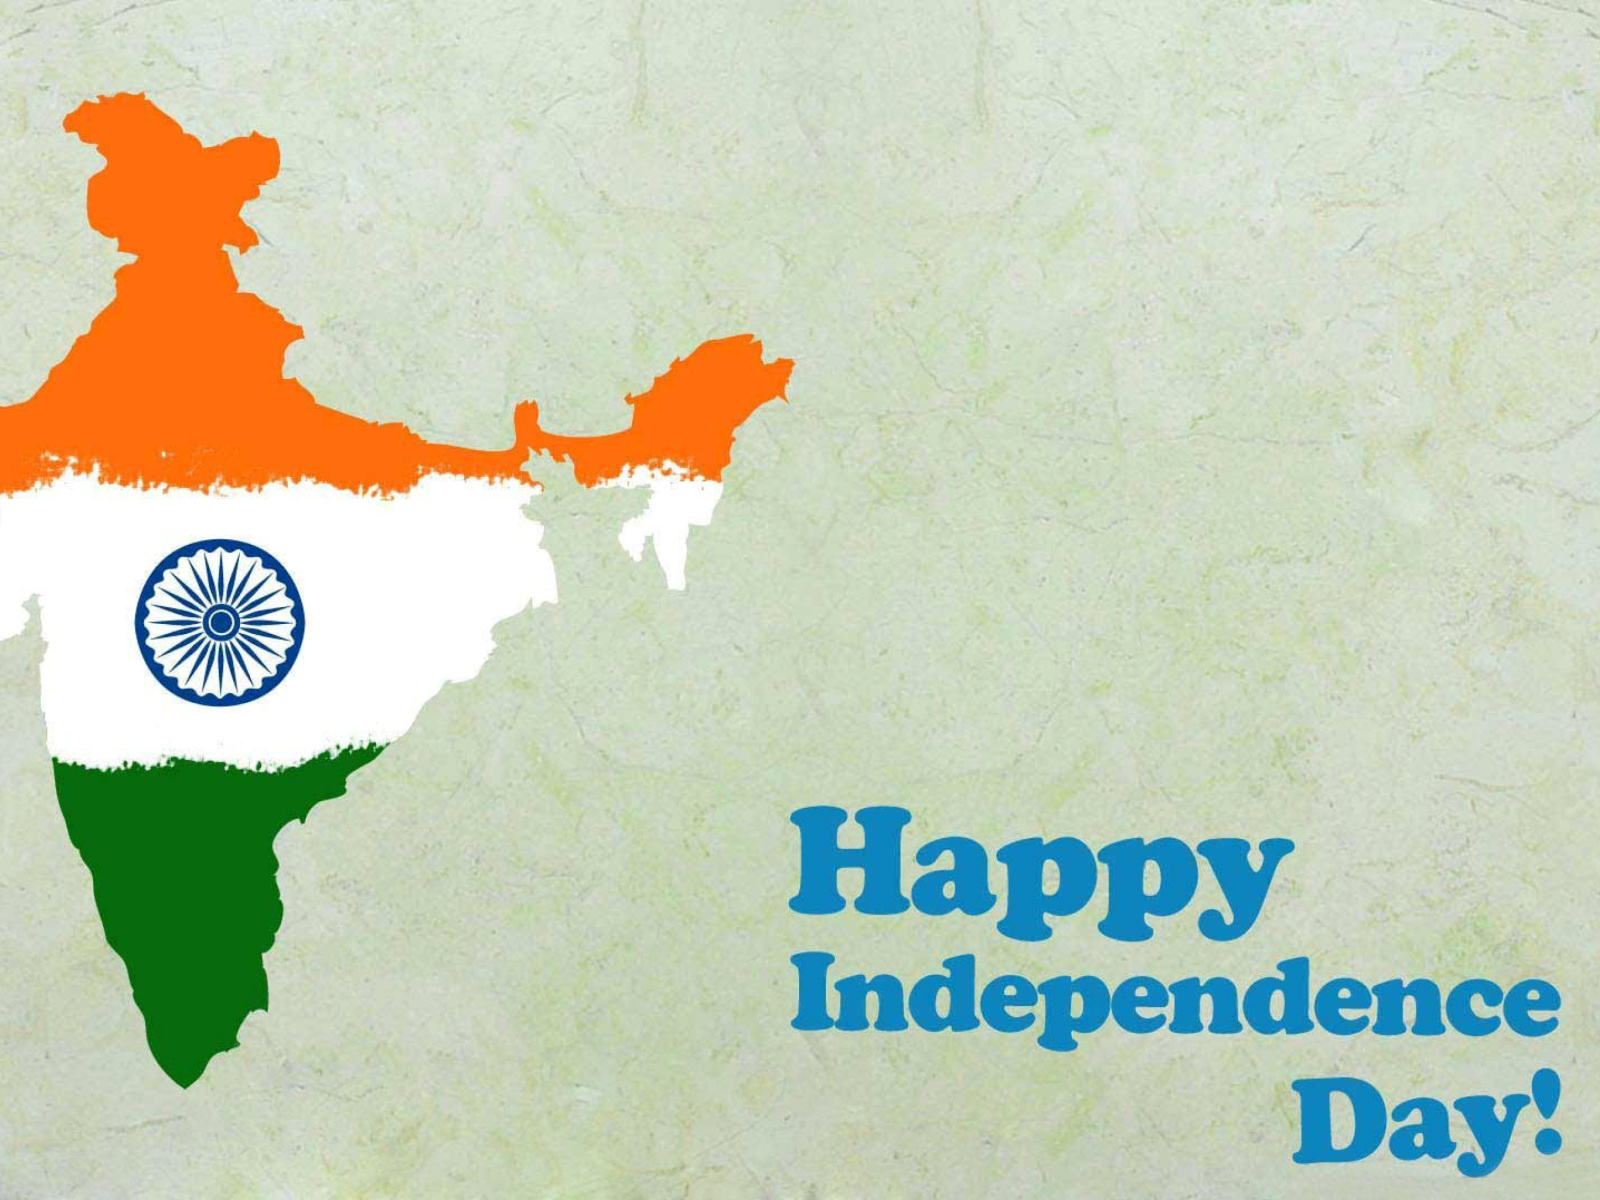 Happy Independence Day India wallpaper 1600x1200